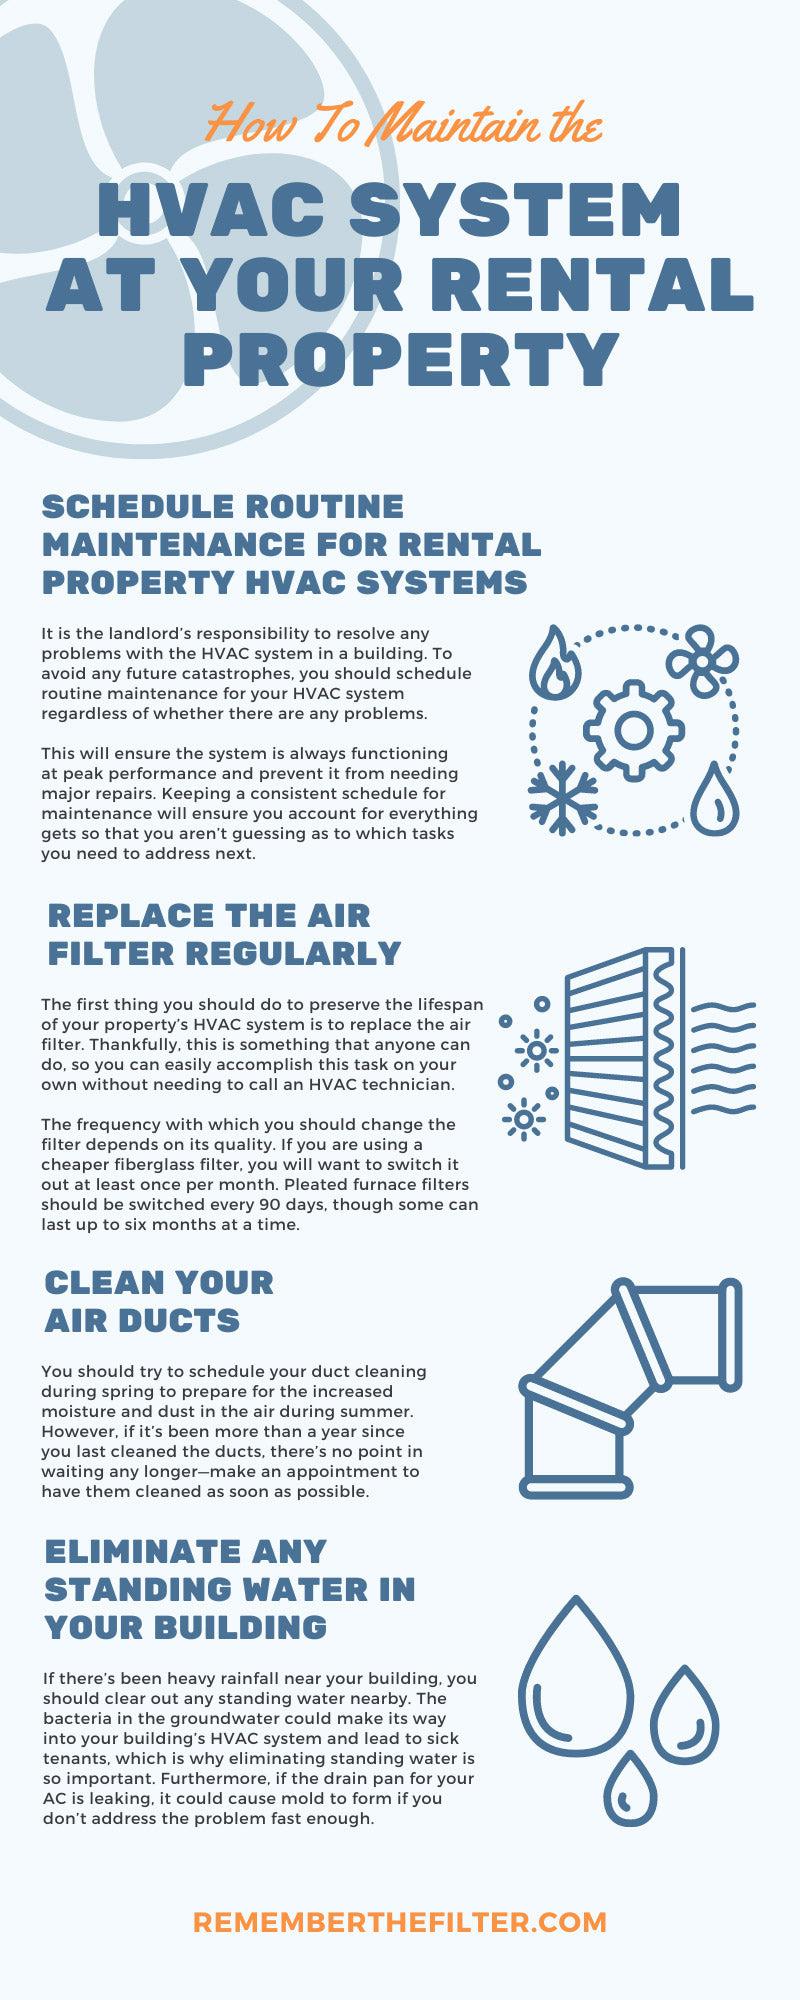 How To Maintain the HVAC System at Your Rental Property